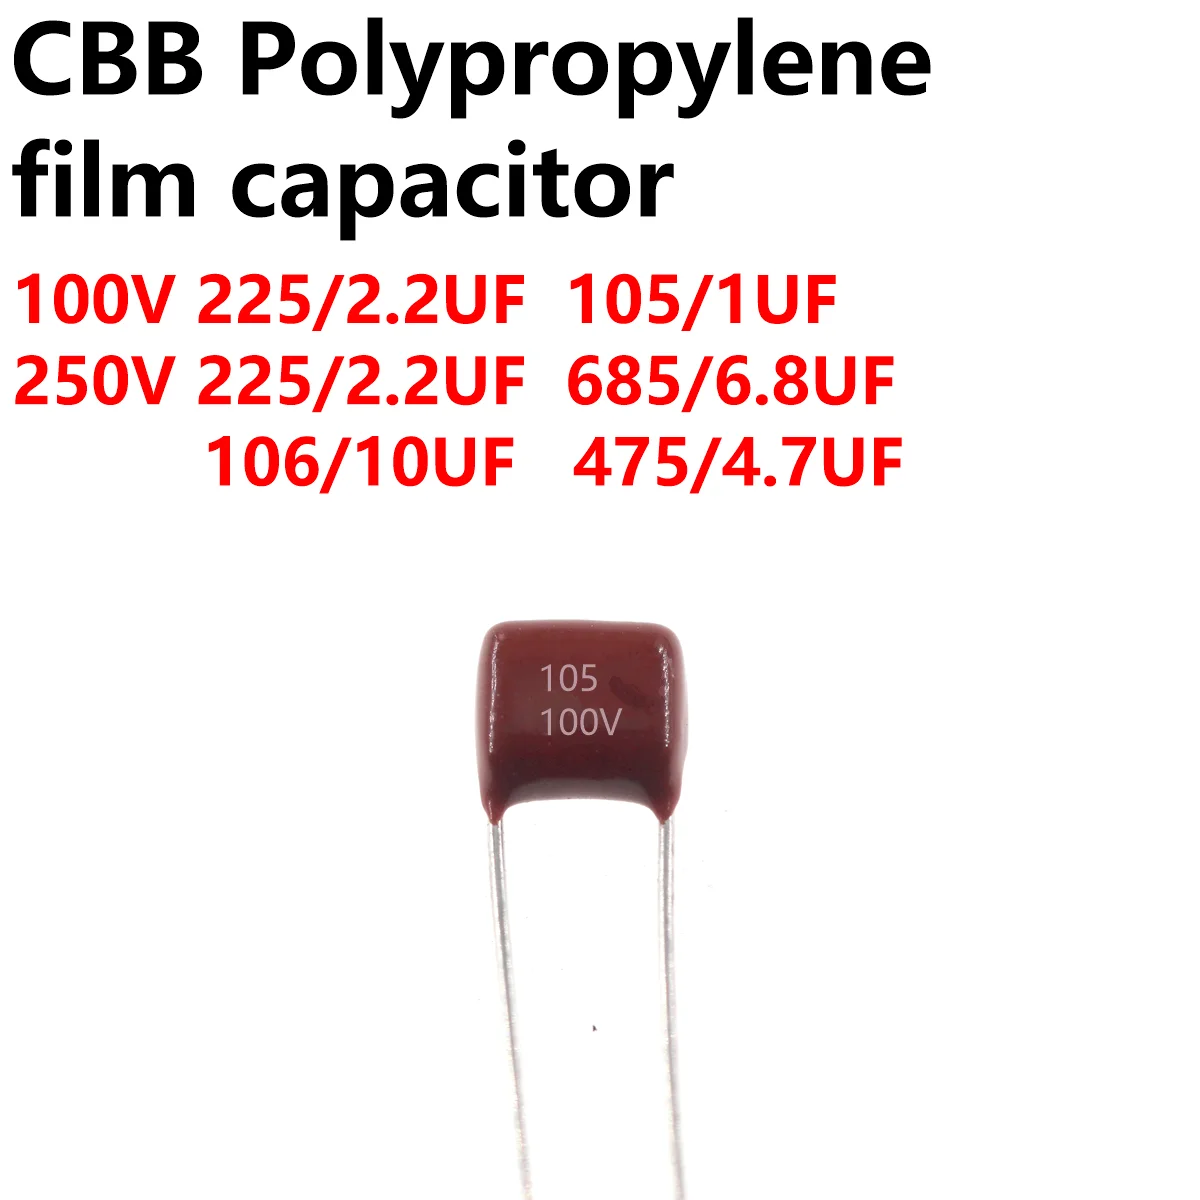 20pcs super fast recovery diode her102 her103 her104 1a 100v 200v 300v do 41 20pcs capacitor CBB 100V 225 2.2UF 105 1UF 250V 475 4.7UF 225 2.2UF 685 6.8UF 106 10UF 105 1UF